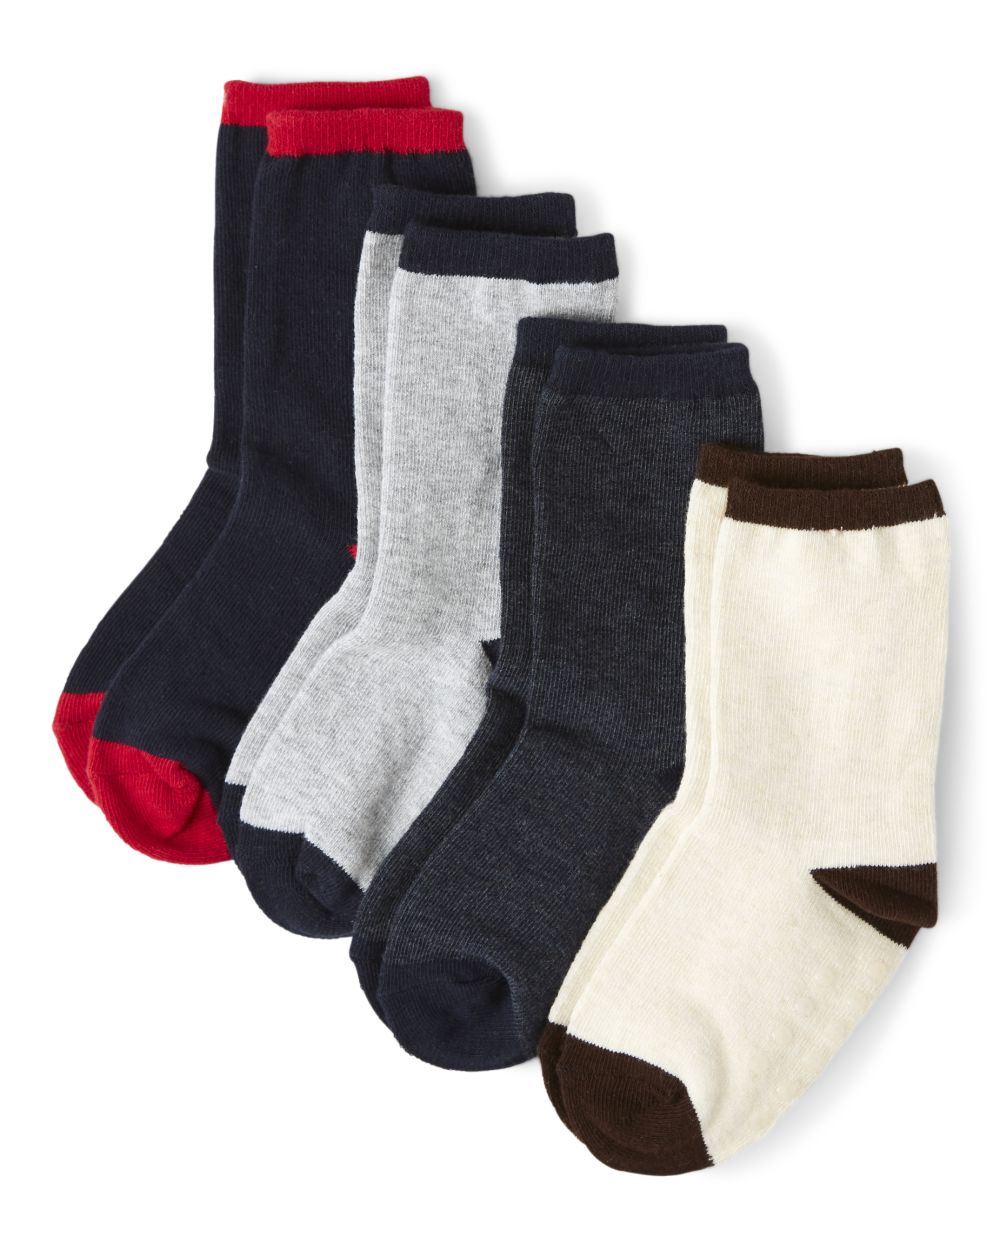 Boys Crew Socks 4-Pack - Every Day Play